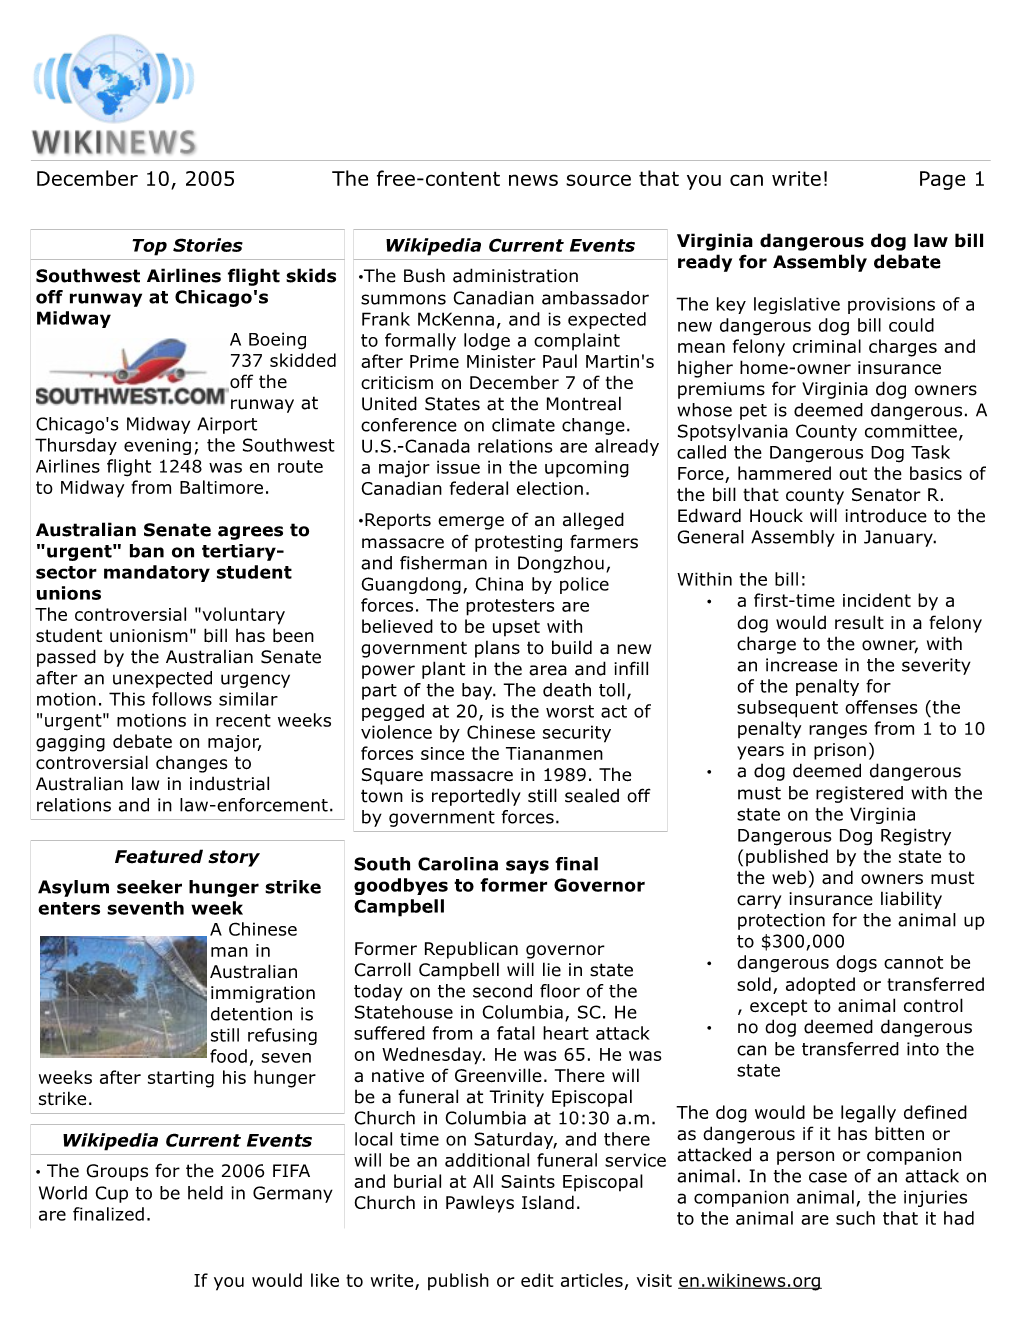 December 10, 2005 the Free-Content News Source That You Can Write! Page 1